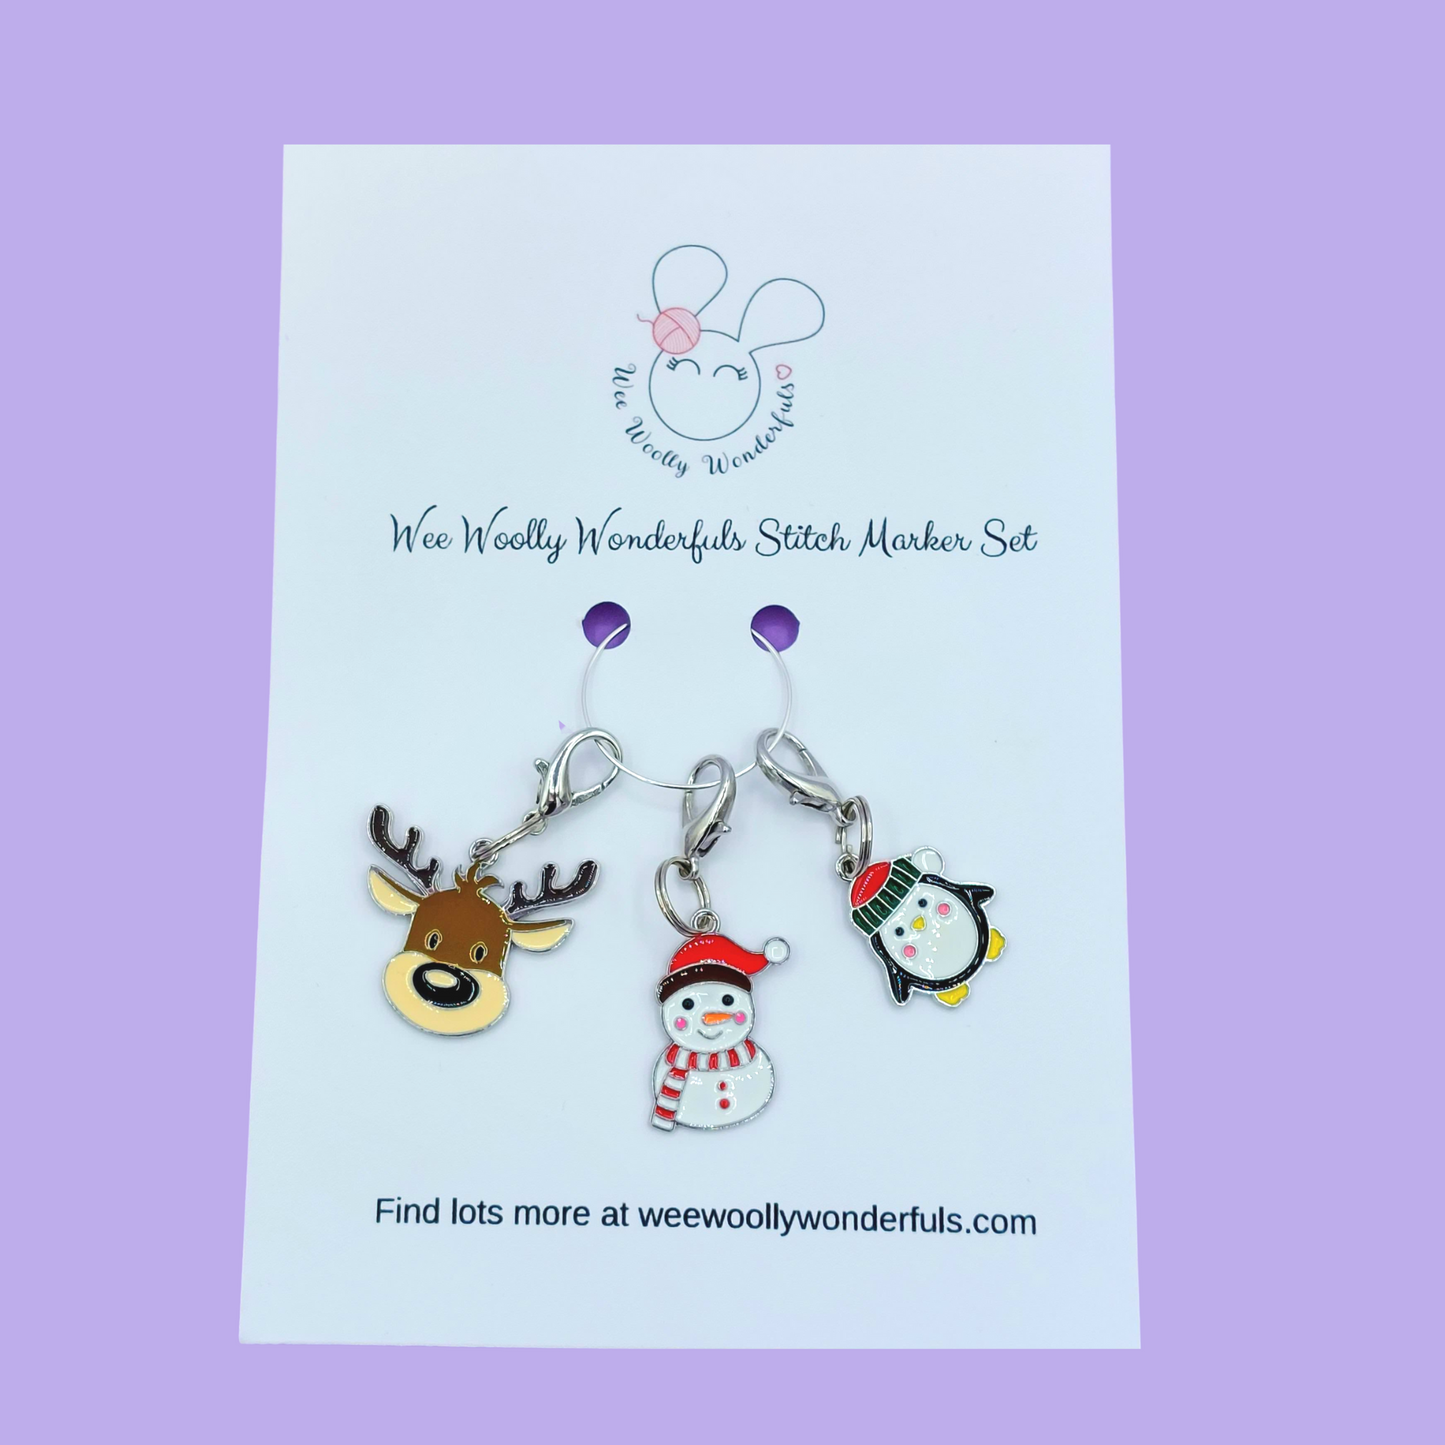 Adorable Stitch Markers Sets - Bee and Daisies, Rainbows, Fruit, Sheep, Cats, and Christmas Stitch Marker sets